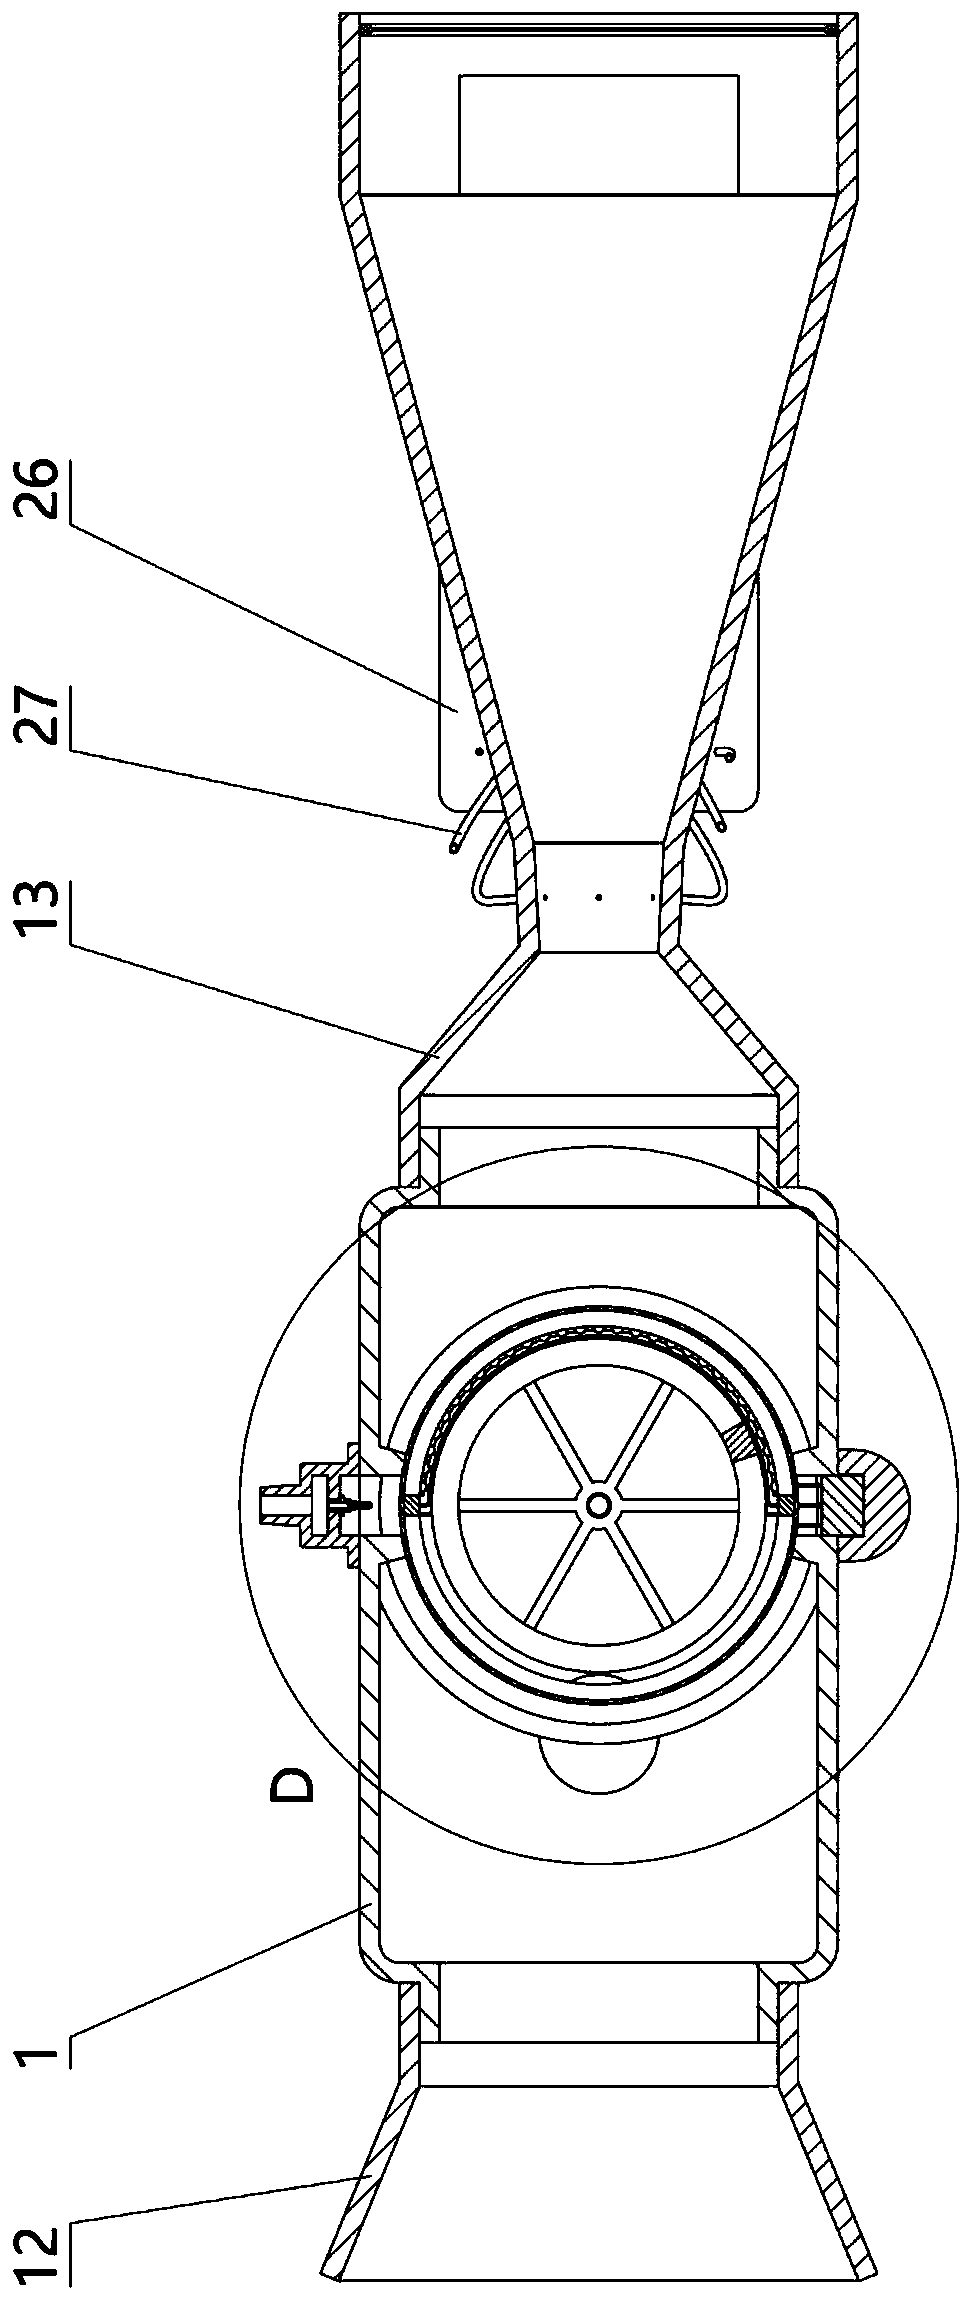 Dust collection device for highway construction